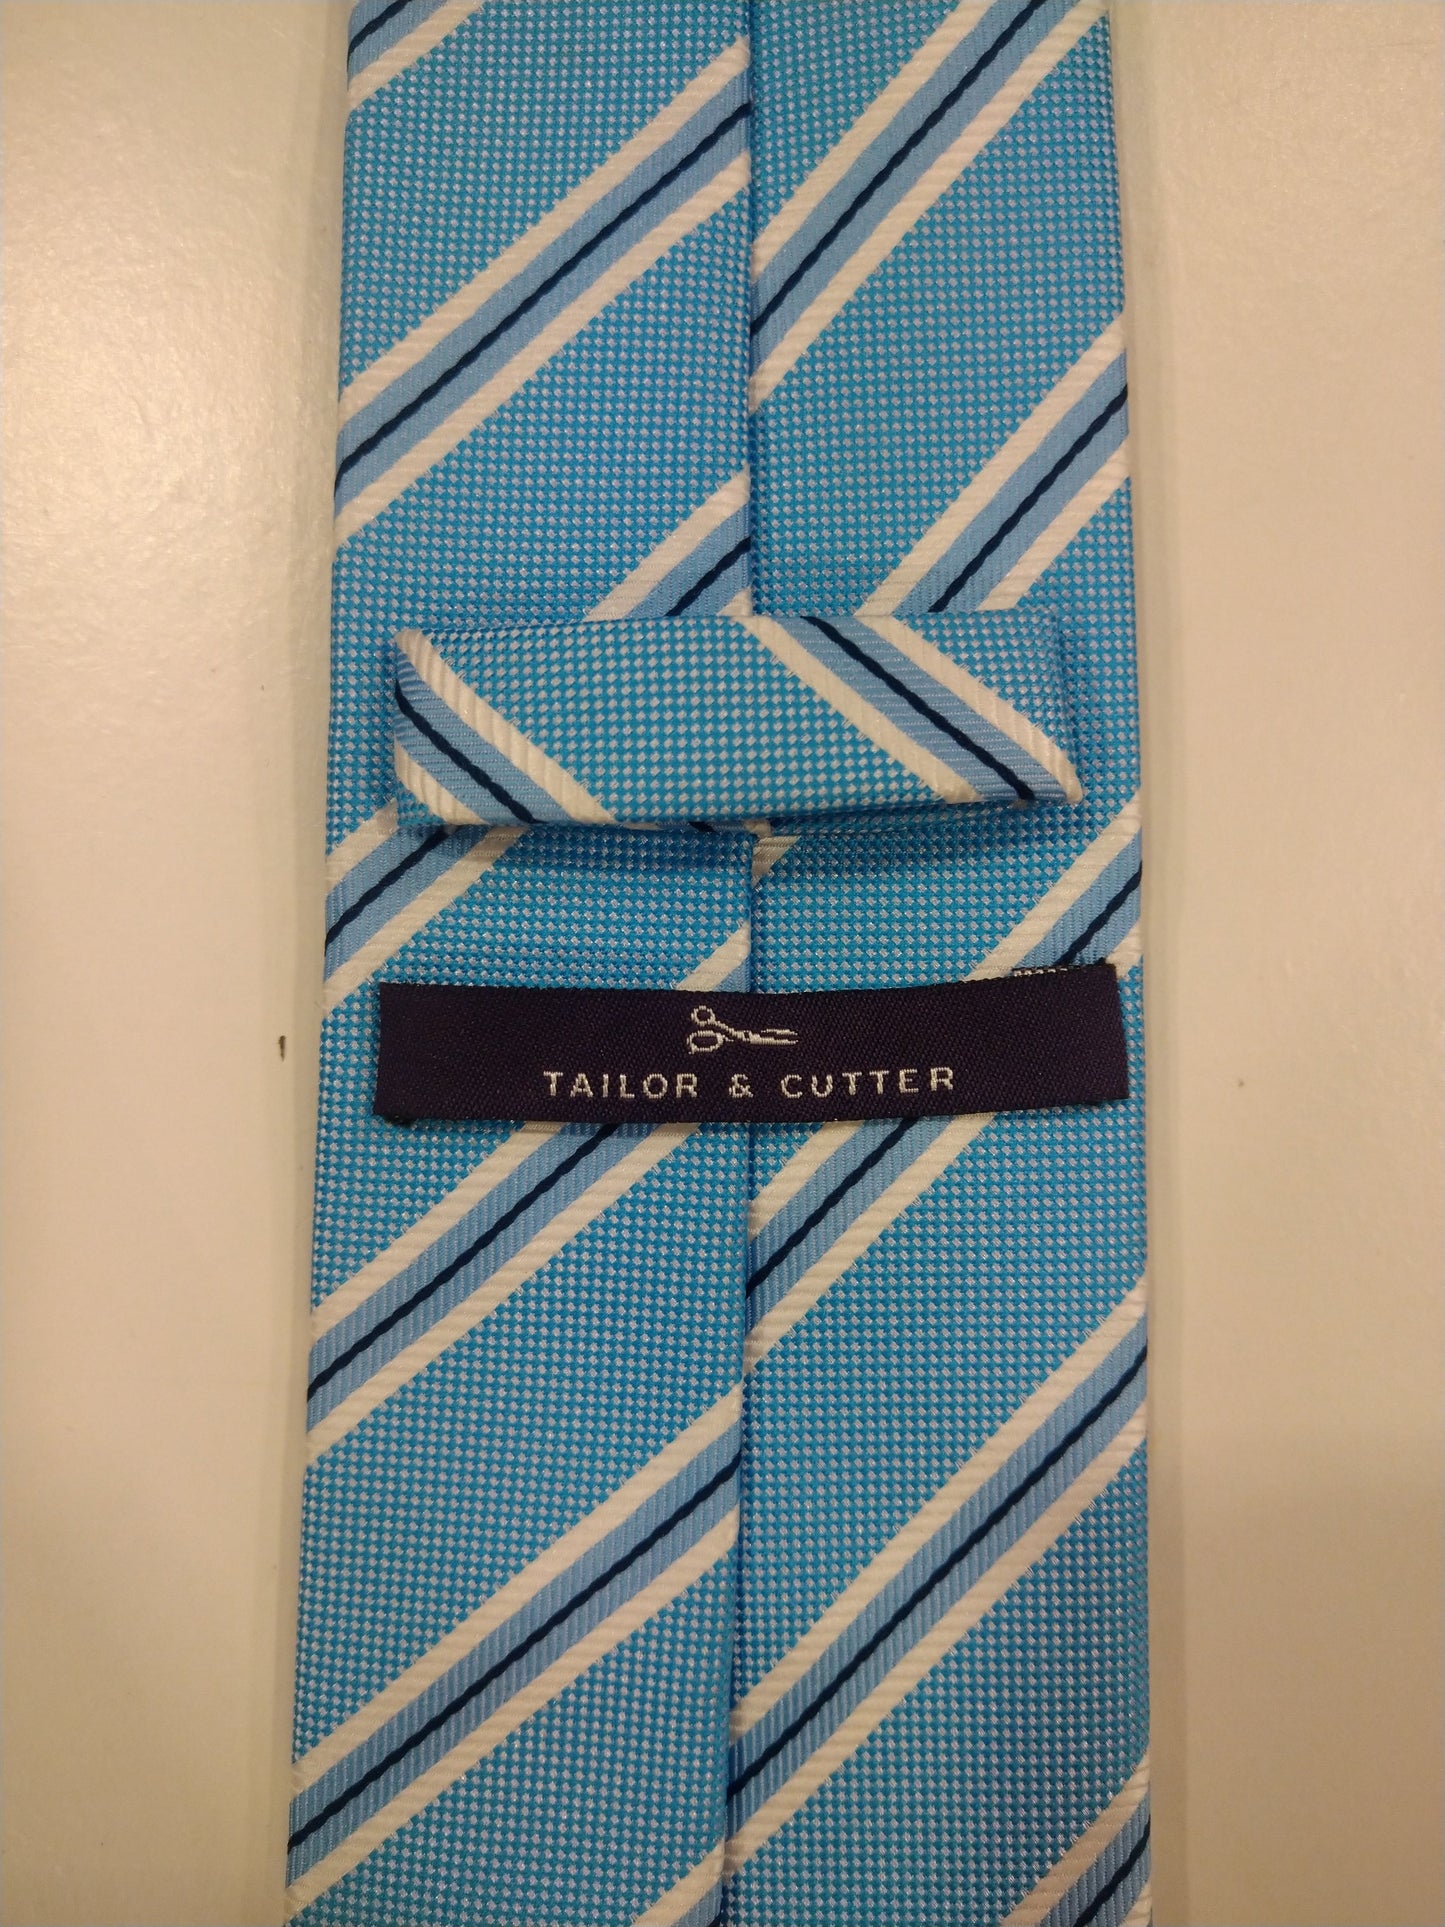 Tailor & Cutter polyester tie. Blue white striped.